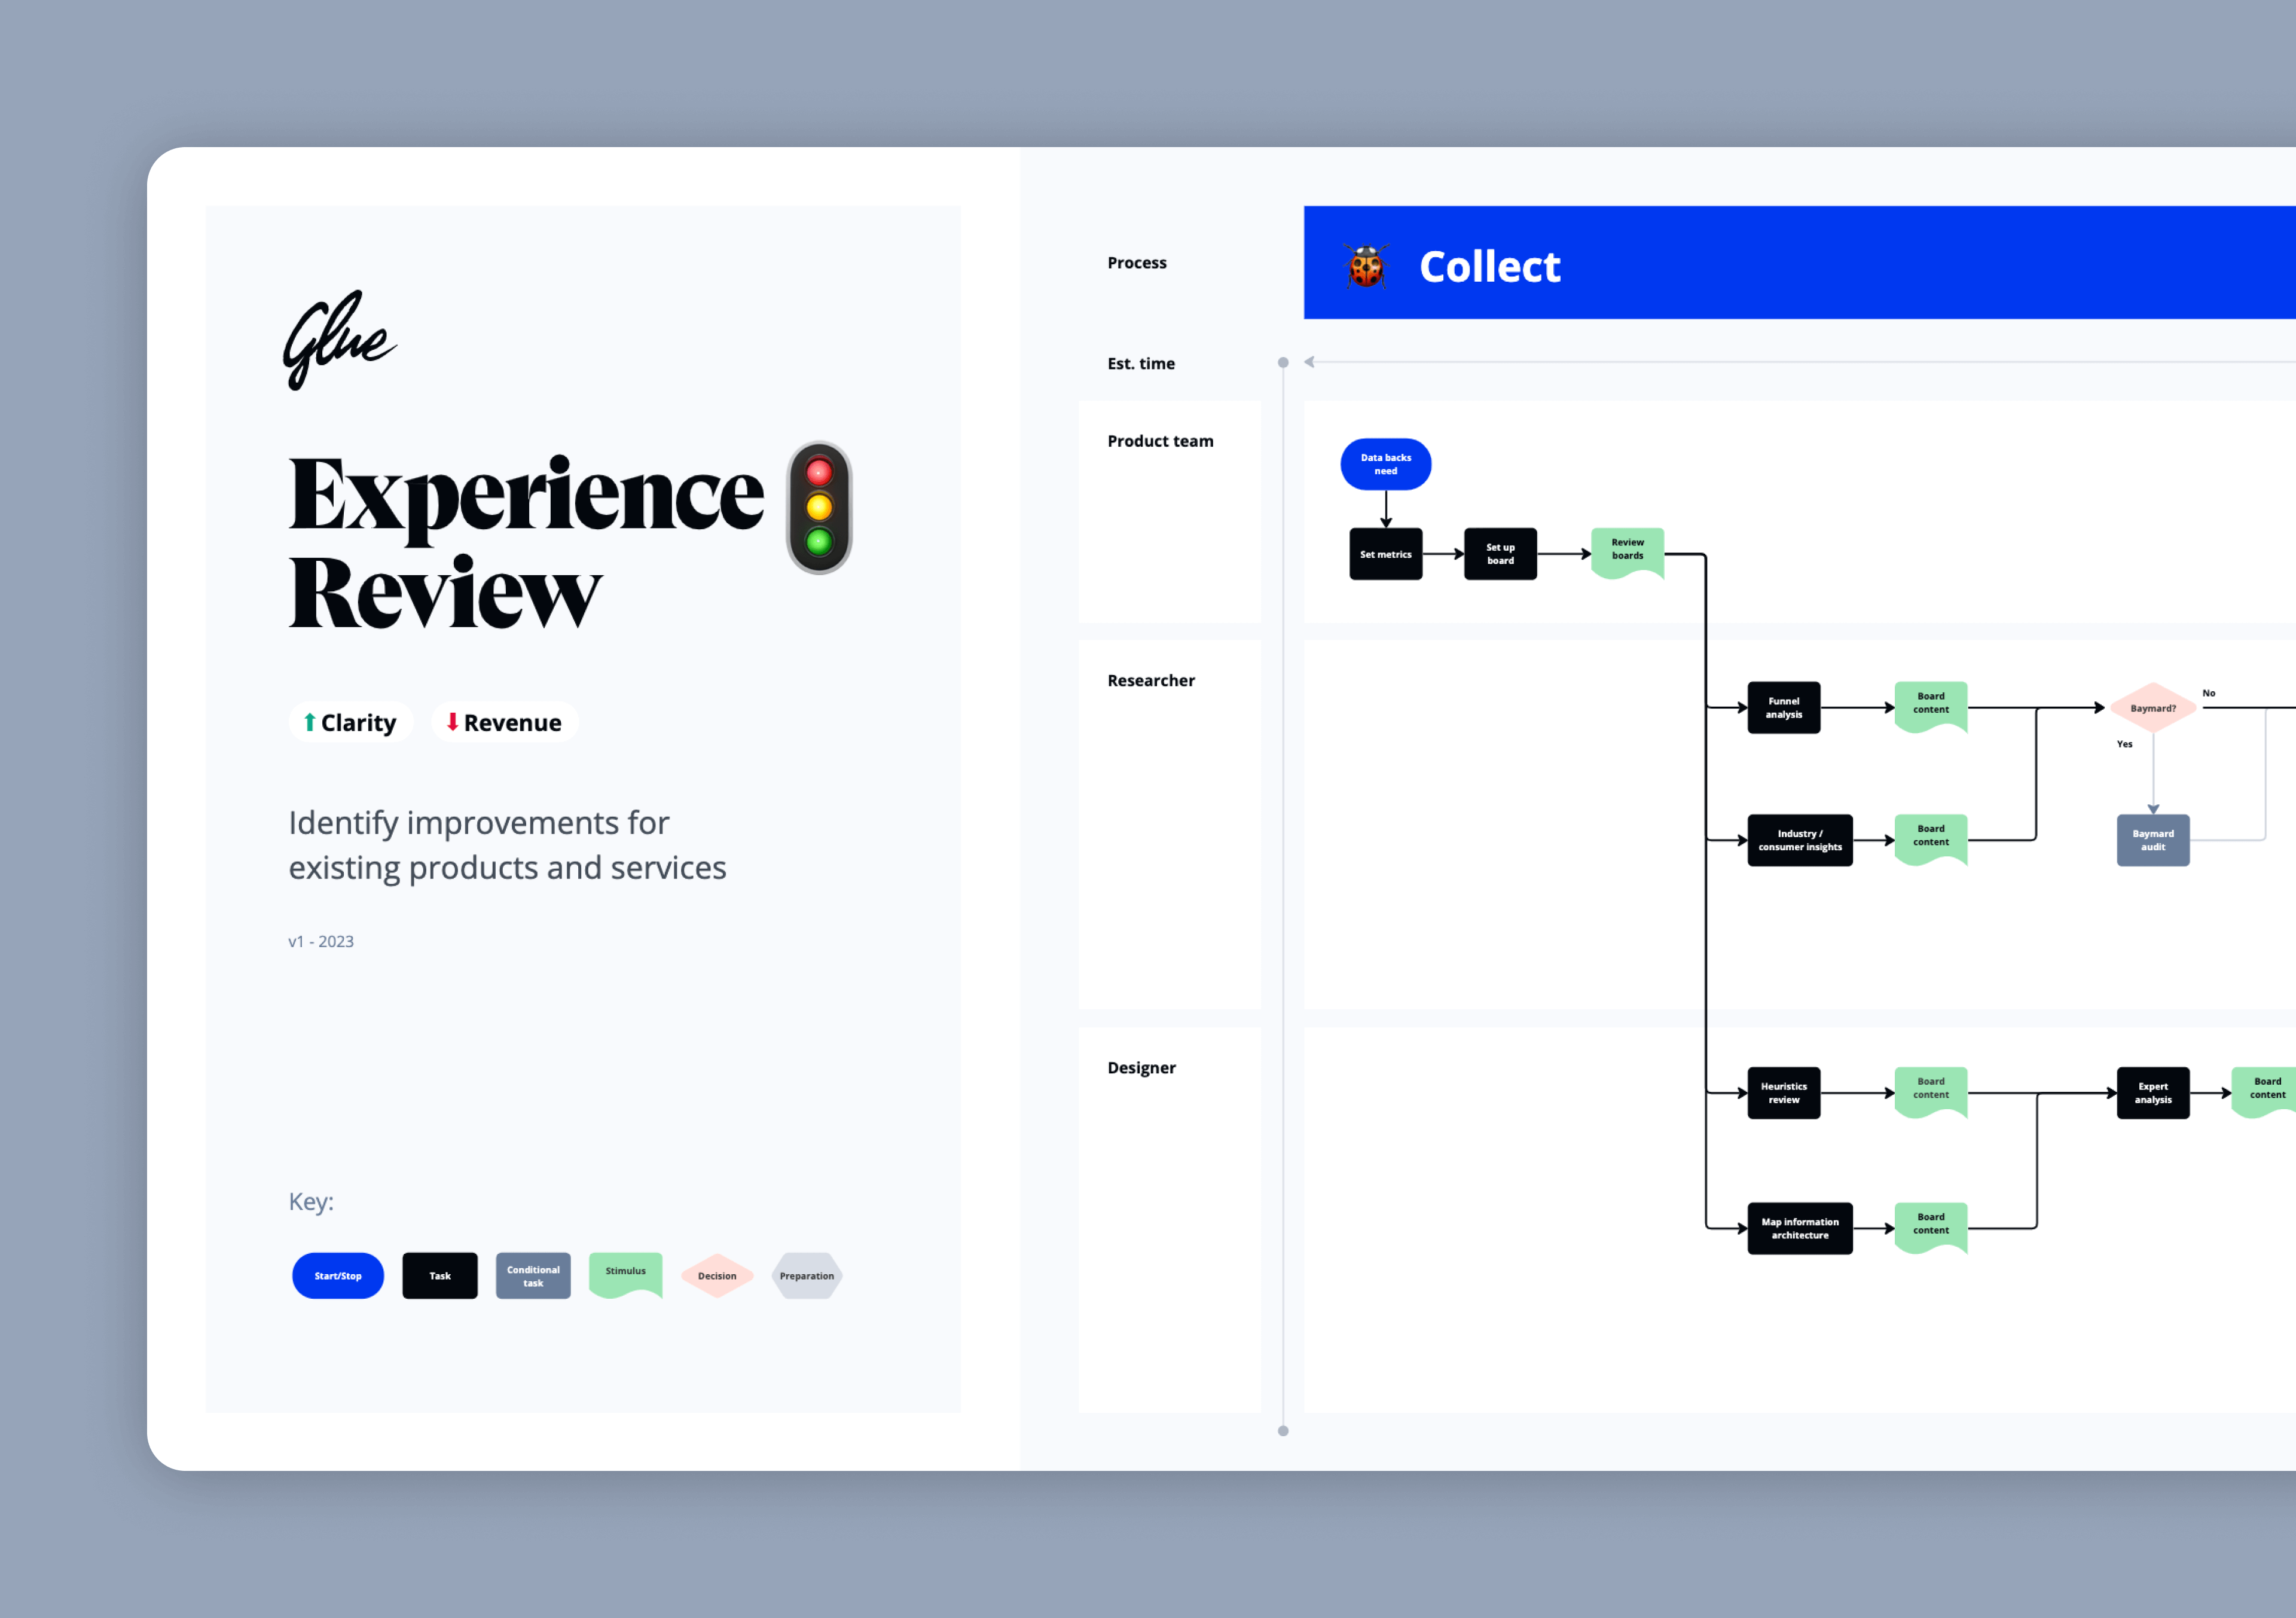 Visualisation of the Glue Design Optimisation Experience Review framework workflow followed by the Glue design, strategy and research team to deliver high-end client projects